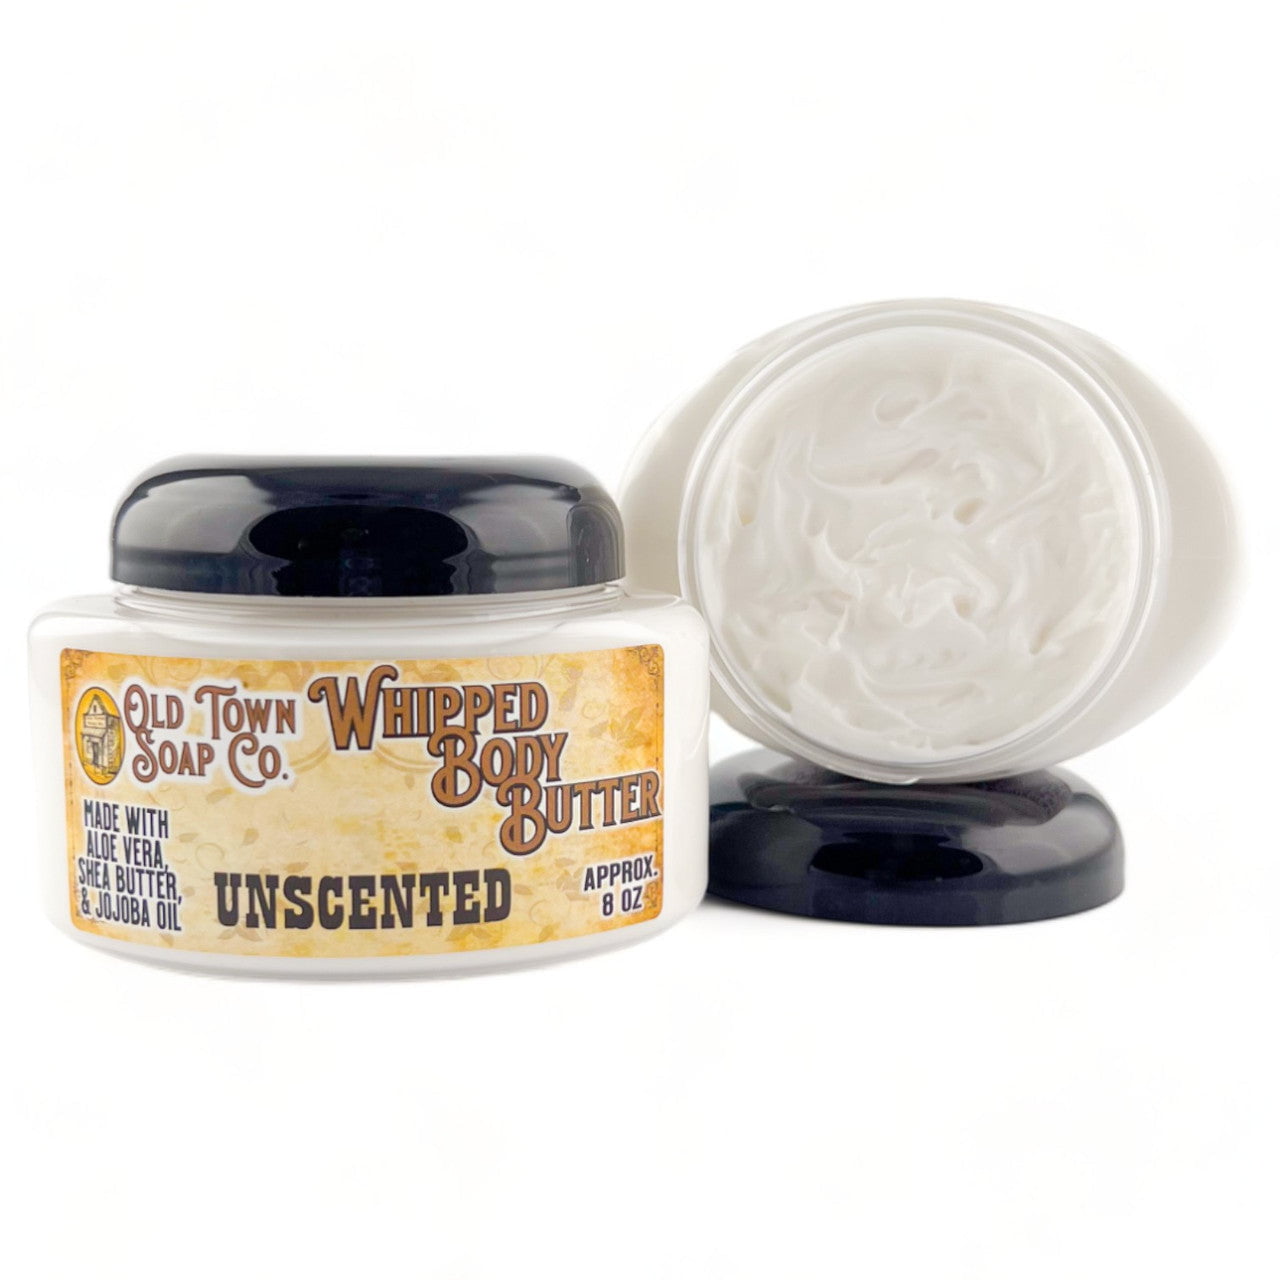 Unscented -Whipped Body Butter - Old Town Soap Co.